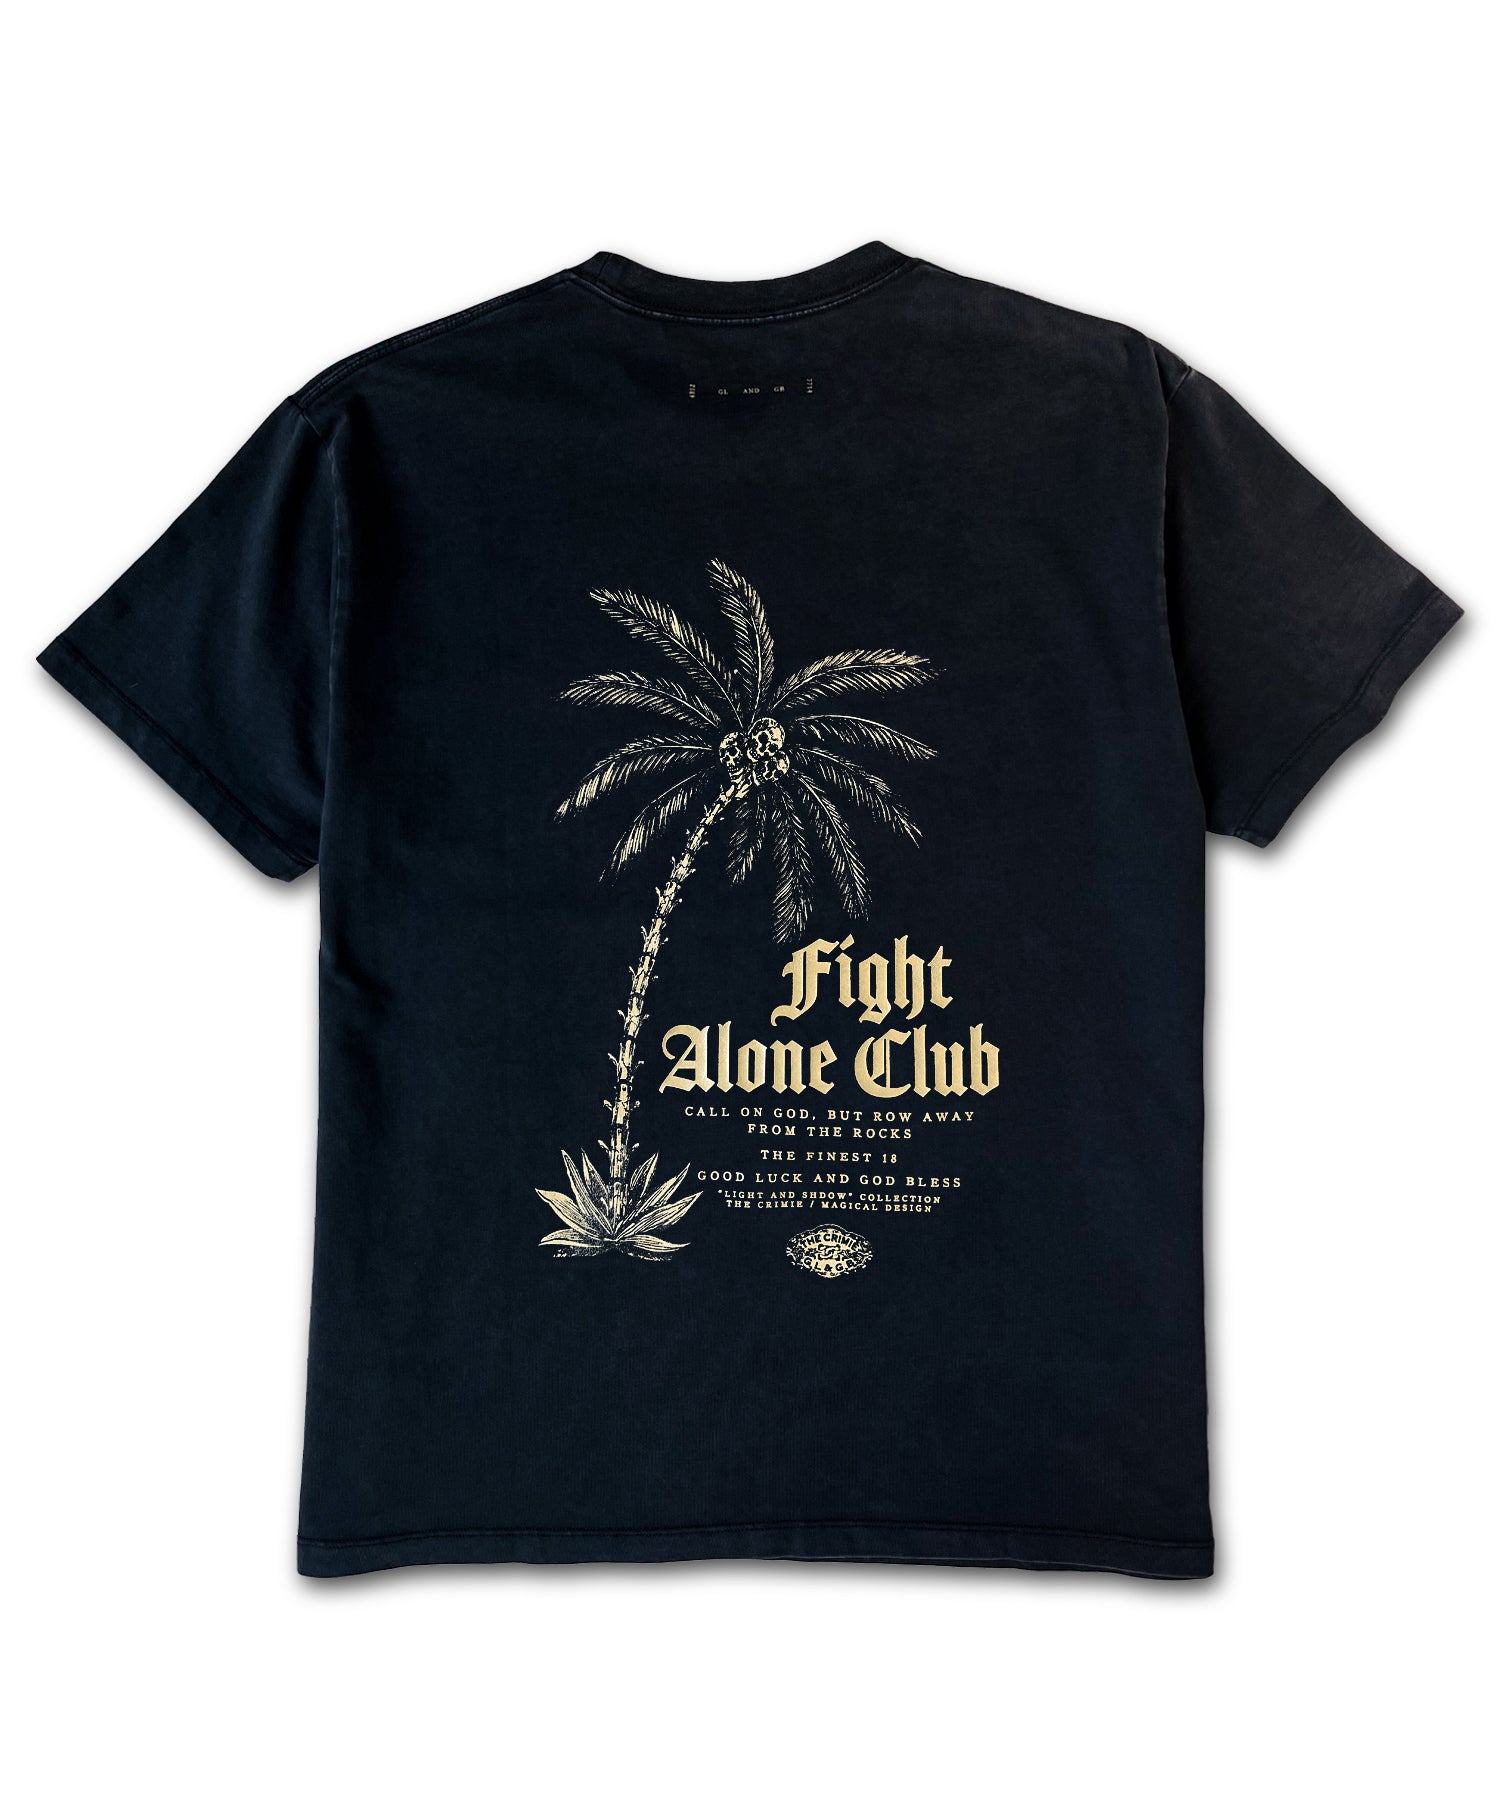 VINTAGE USED "FIGHT ALONE" T SHIRT(MAGICAL DESIGN)